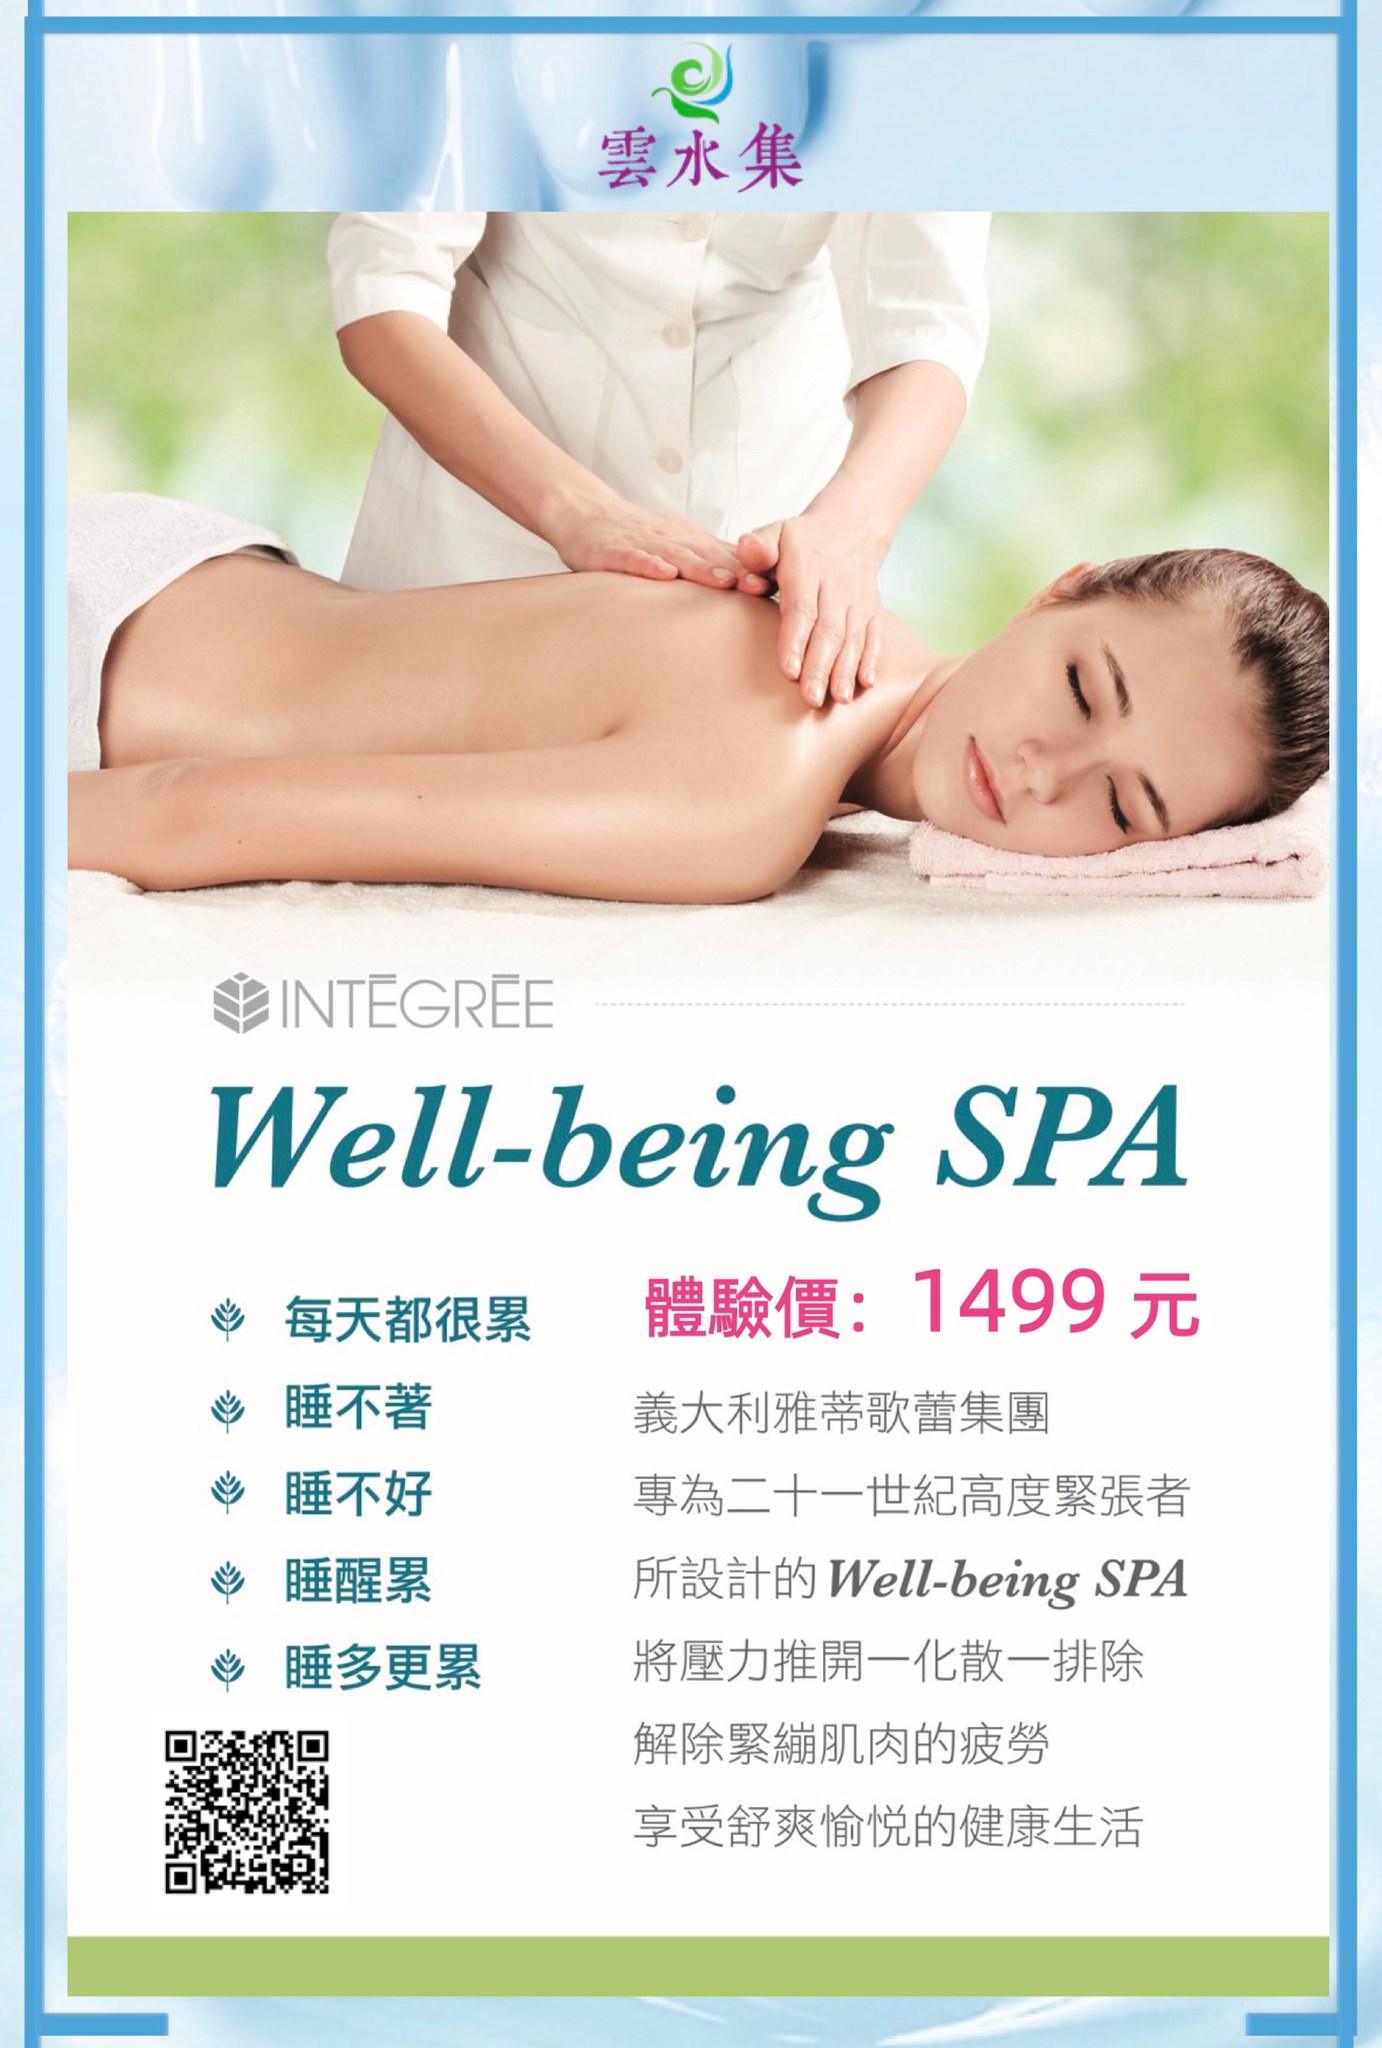 Well-being SPA